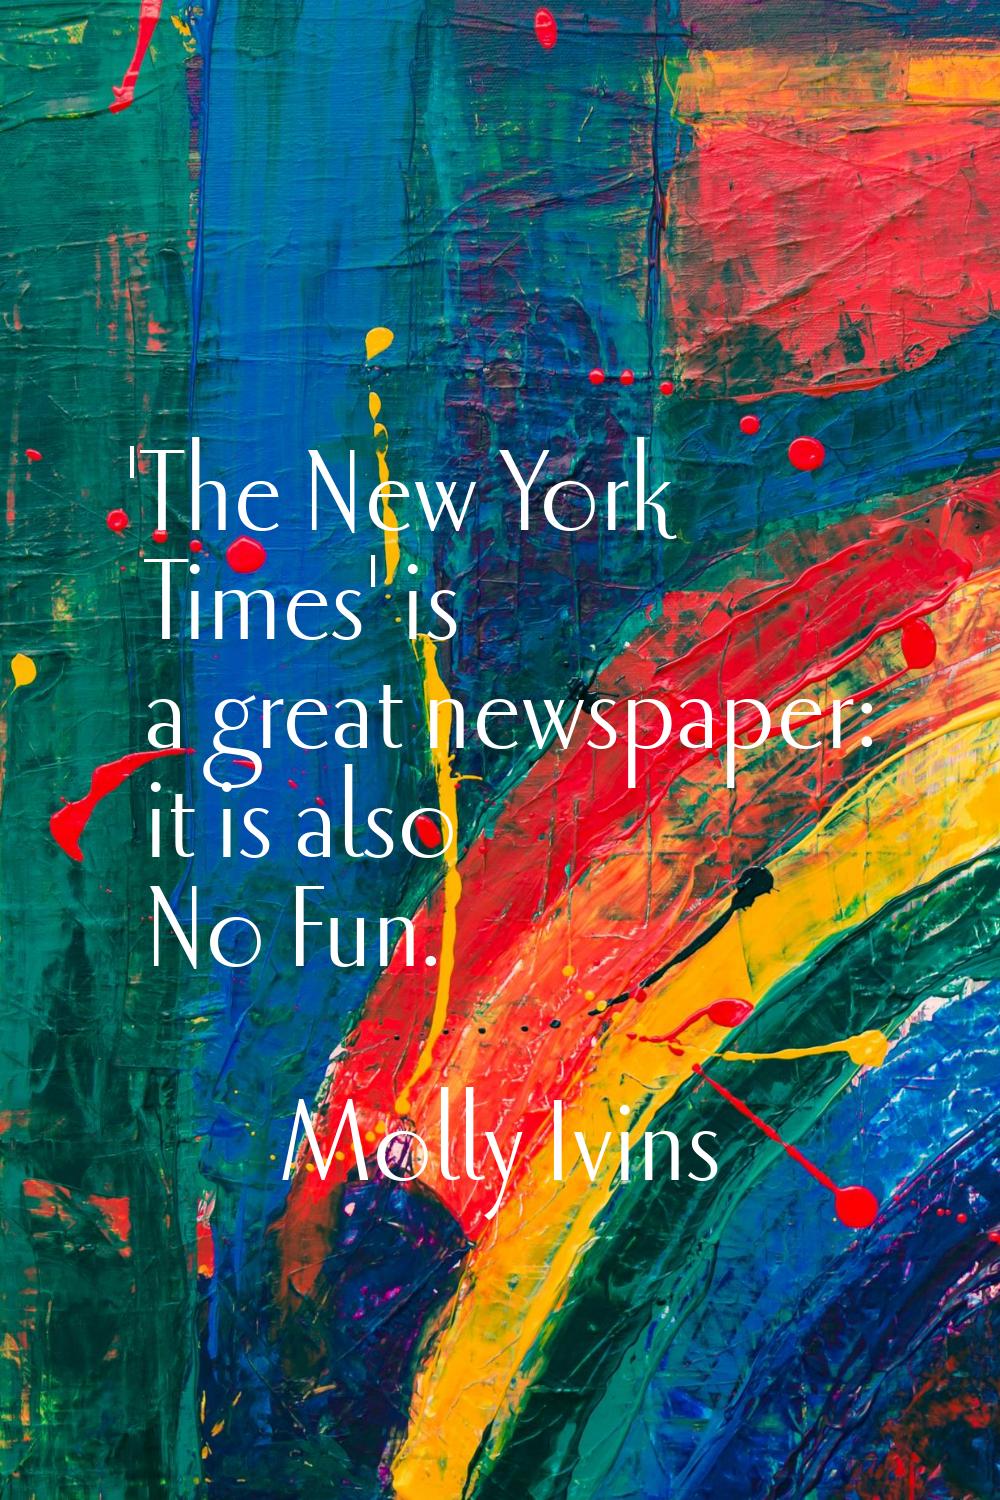 'The New York Times' is a great newspaper: it is also No Fun.